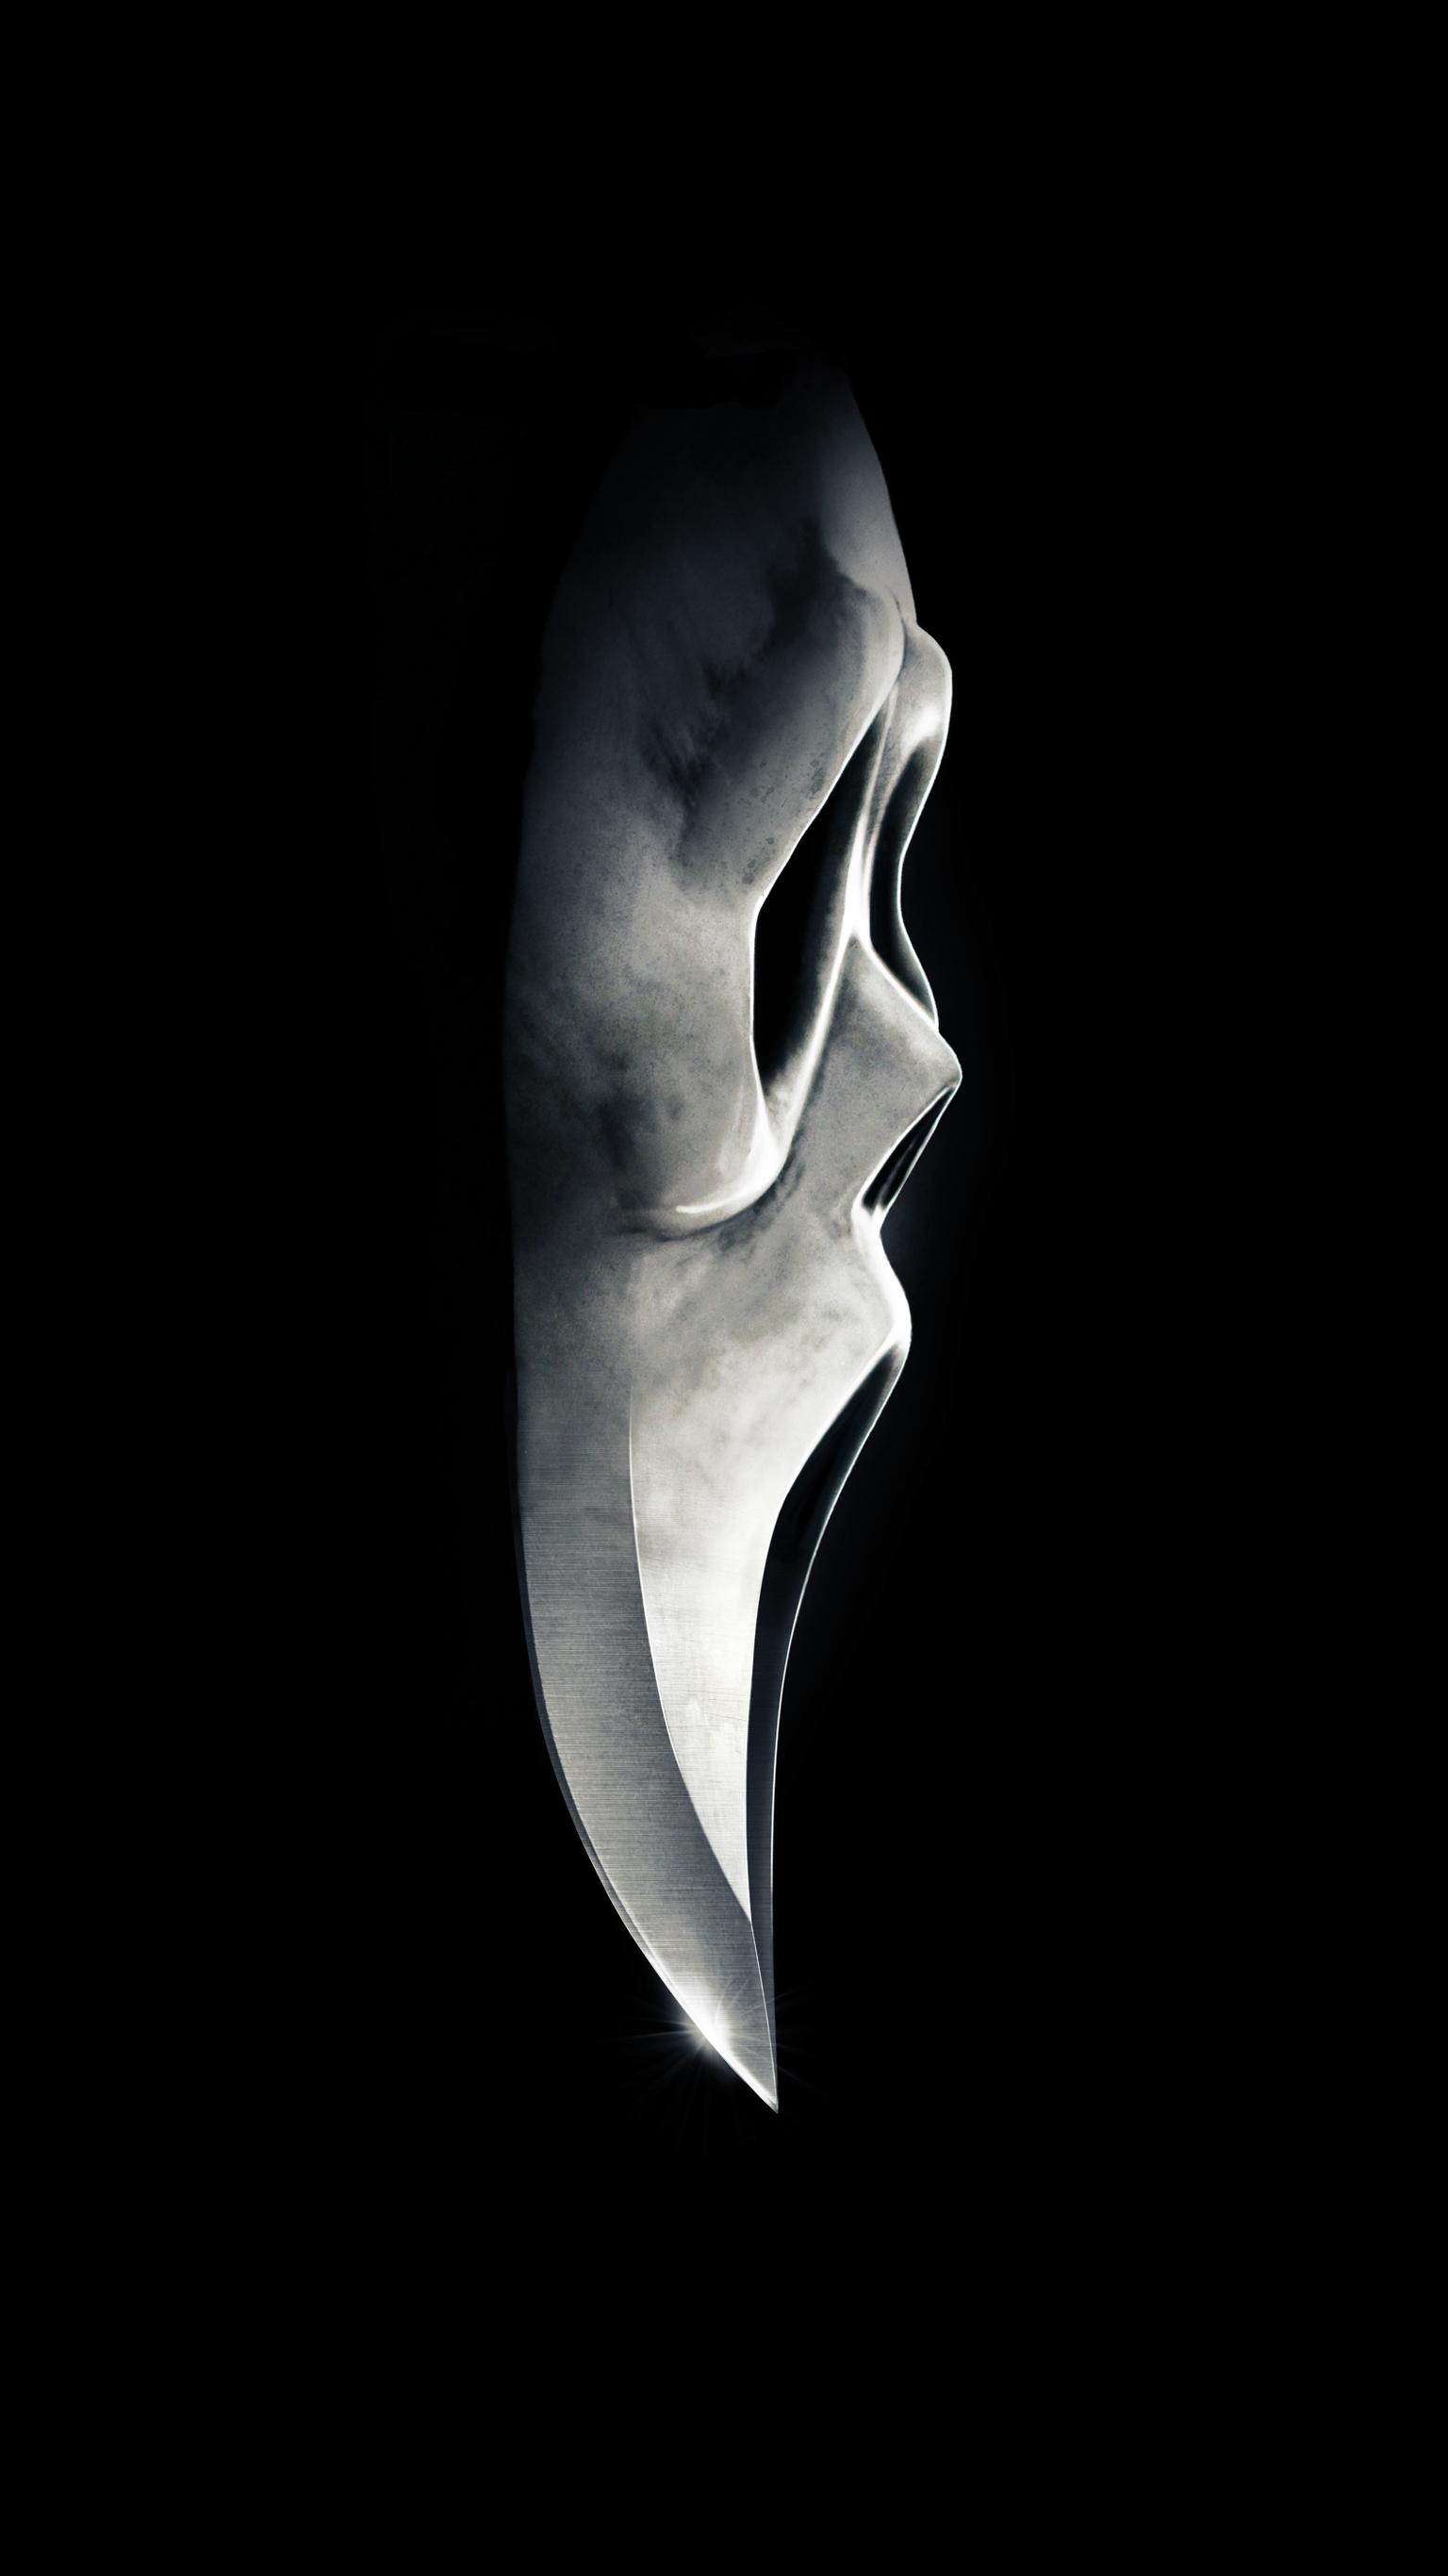 Free download Scream Ghostface Wallpaper on [1536x2732] for your Desktop, Mobile & Tablet. Explore Scream iPhone Wallpaper. Scream 4 Wallpaper, Scream Wallpaper, Gundam iPhone Wallpaper